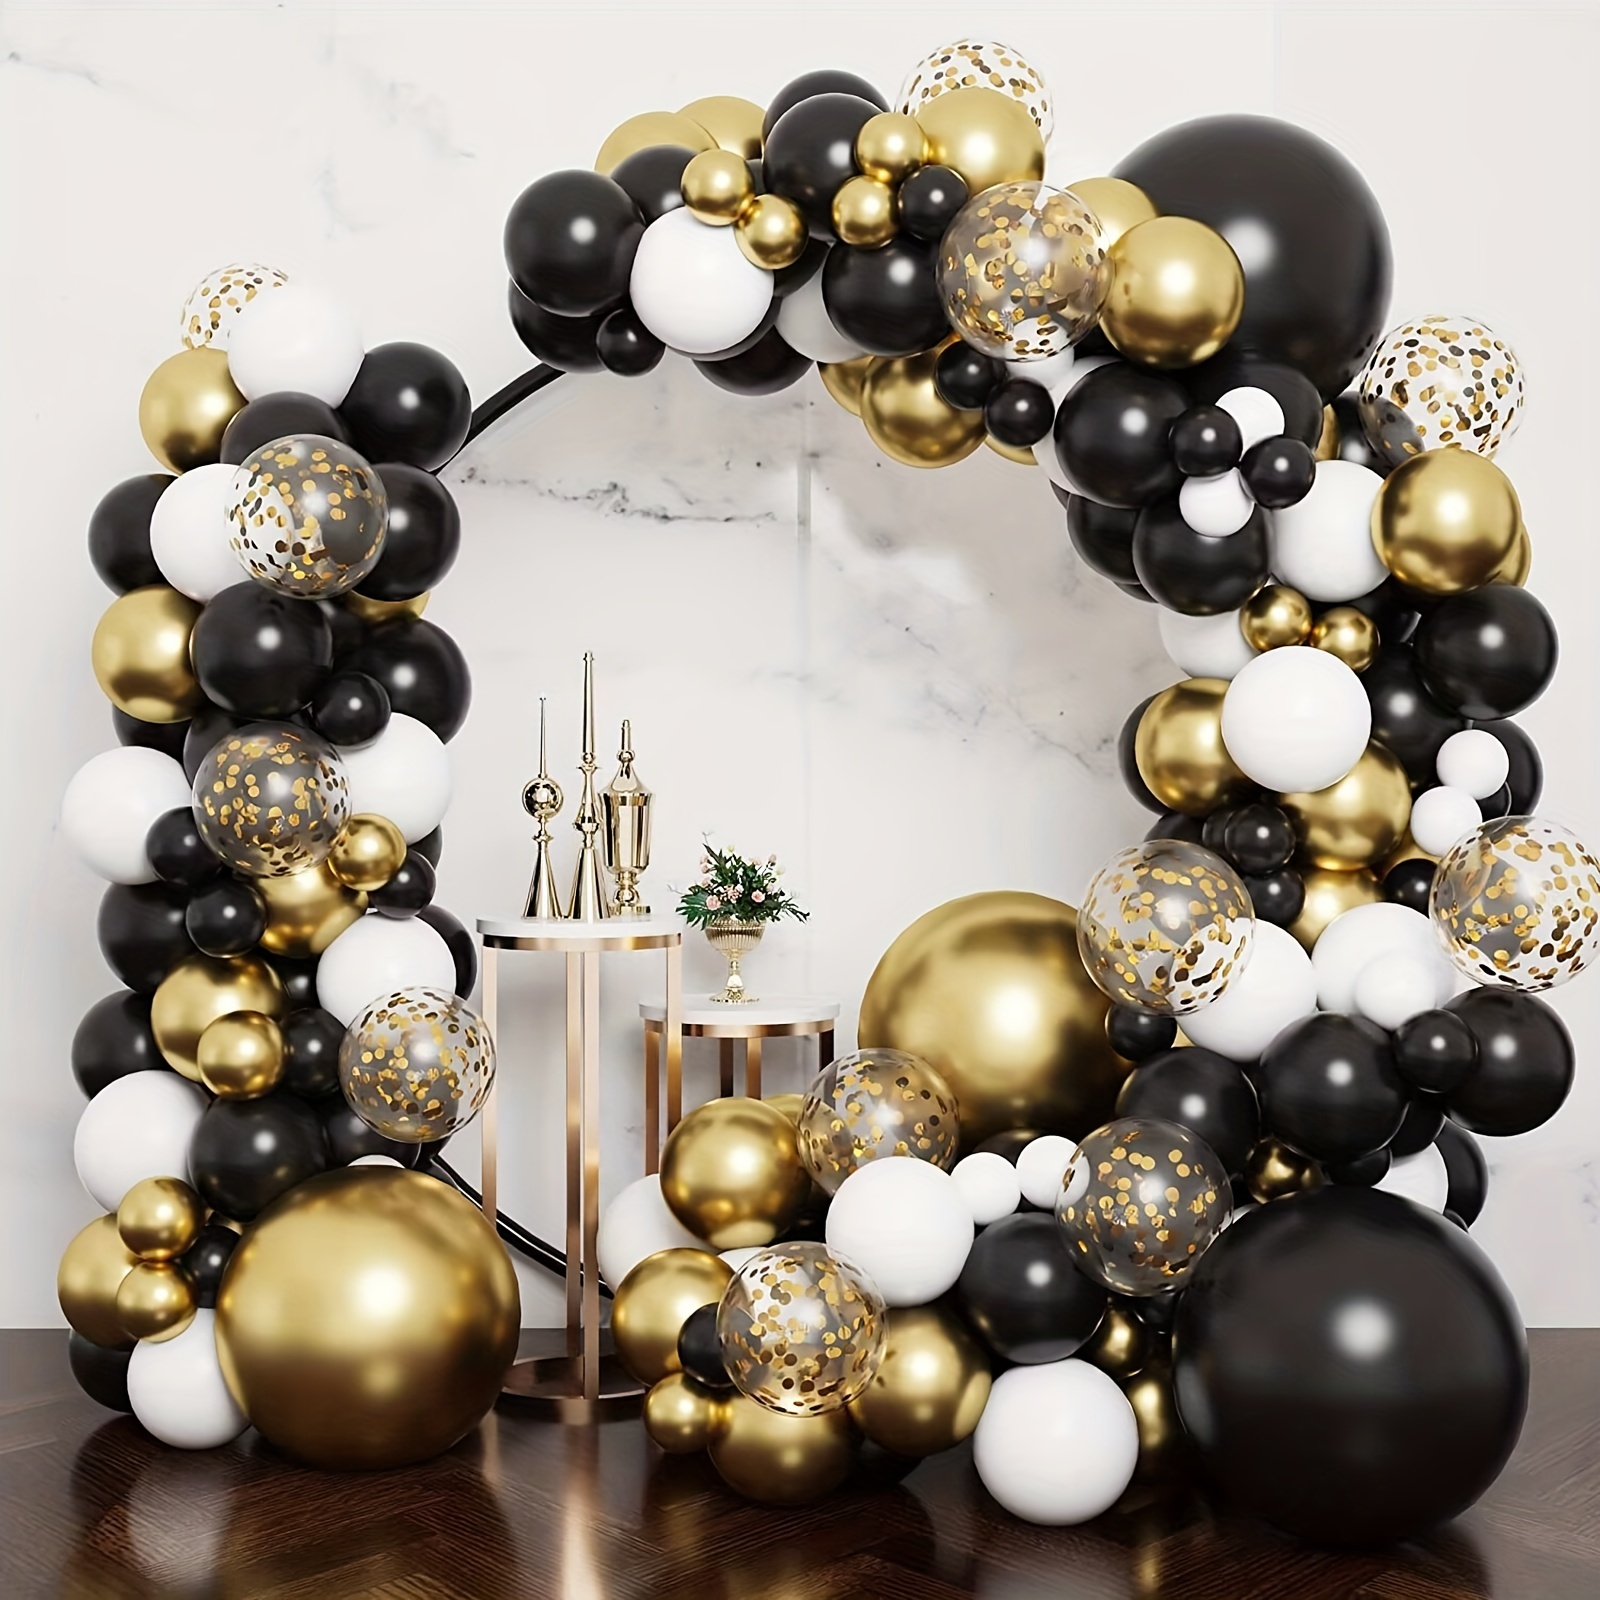 Black and Gold Balloons Garland Arch Kit with Black Gold Confetti Balloons  for Graduation Birthday Party Decorations Birthday Party for Men.